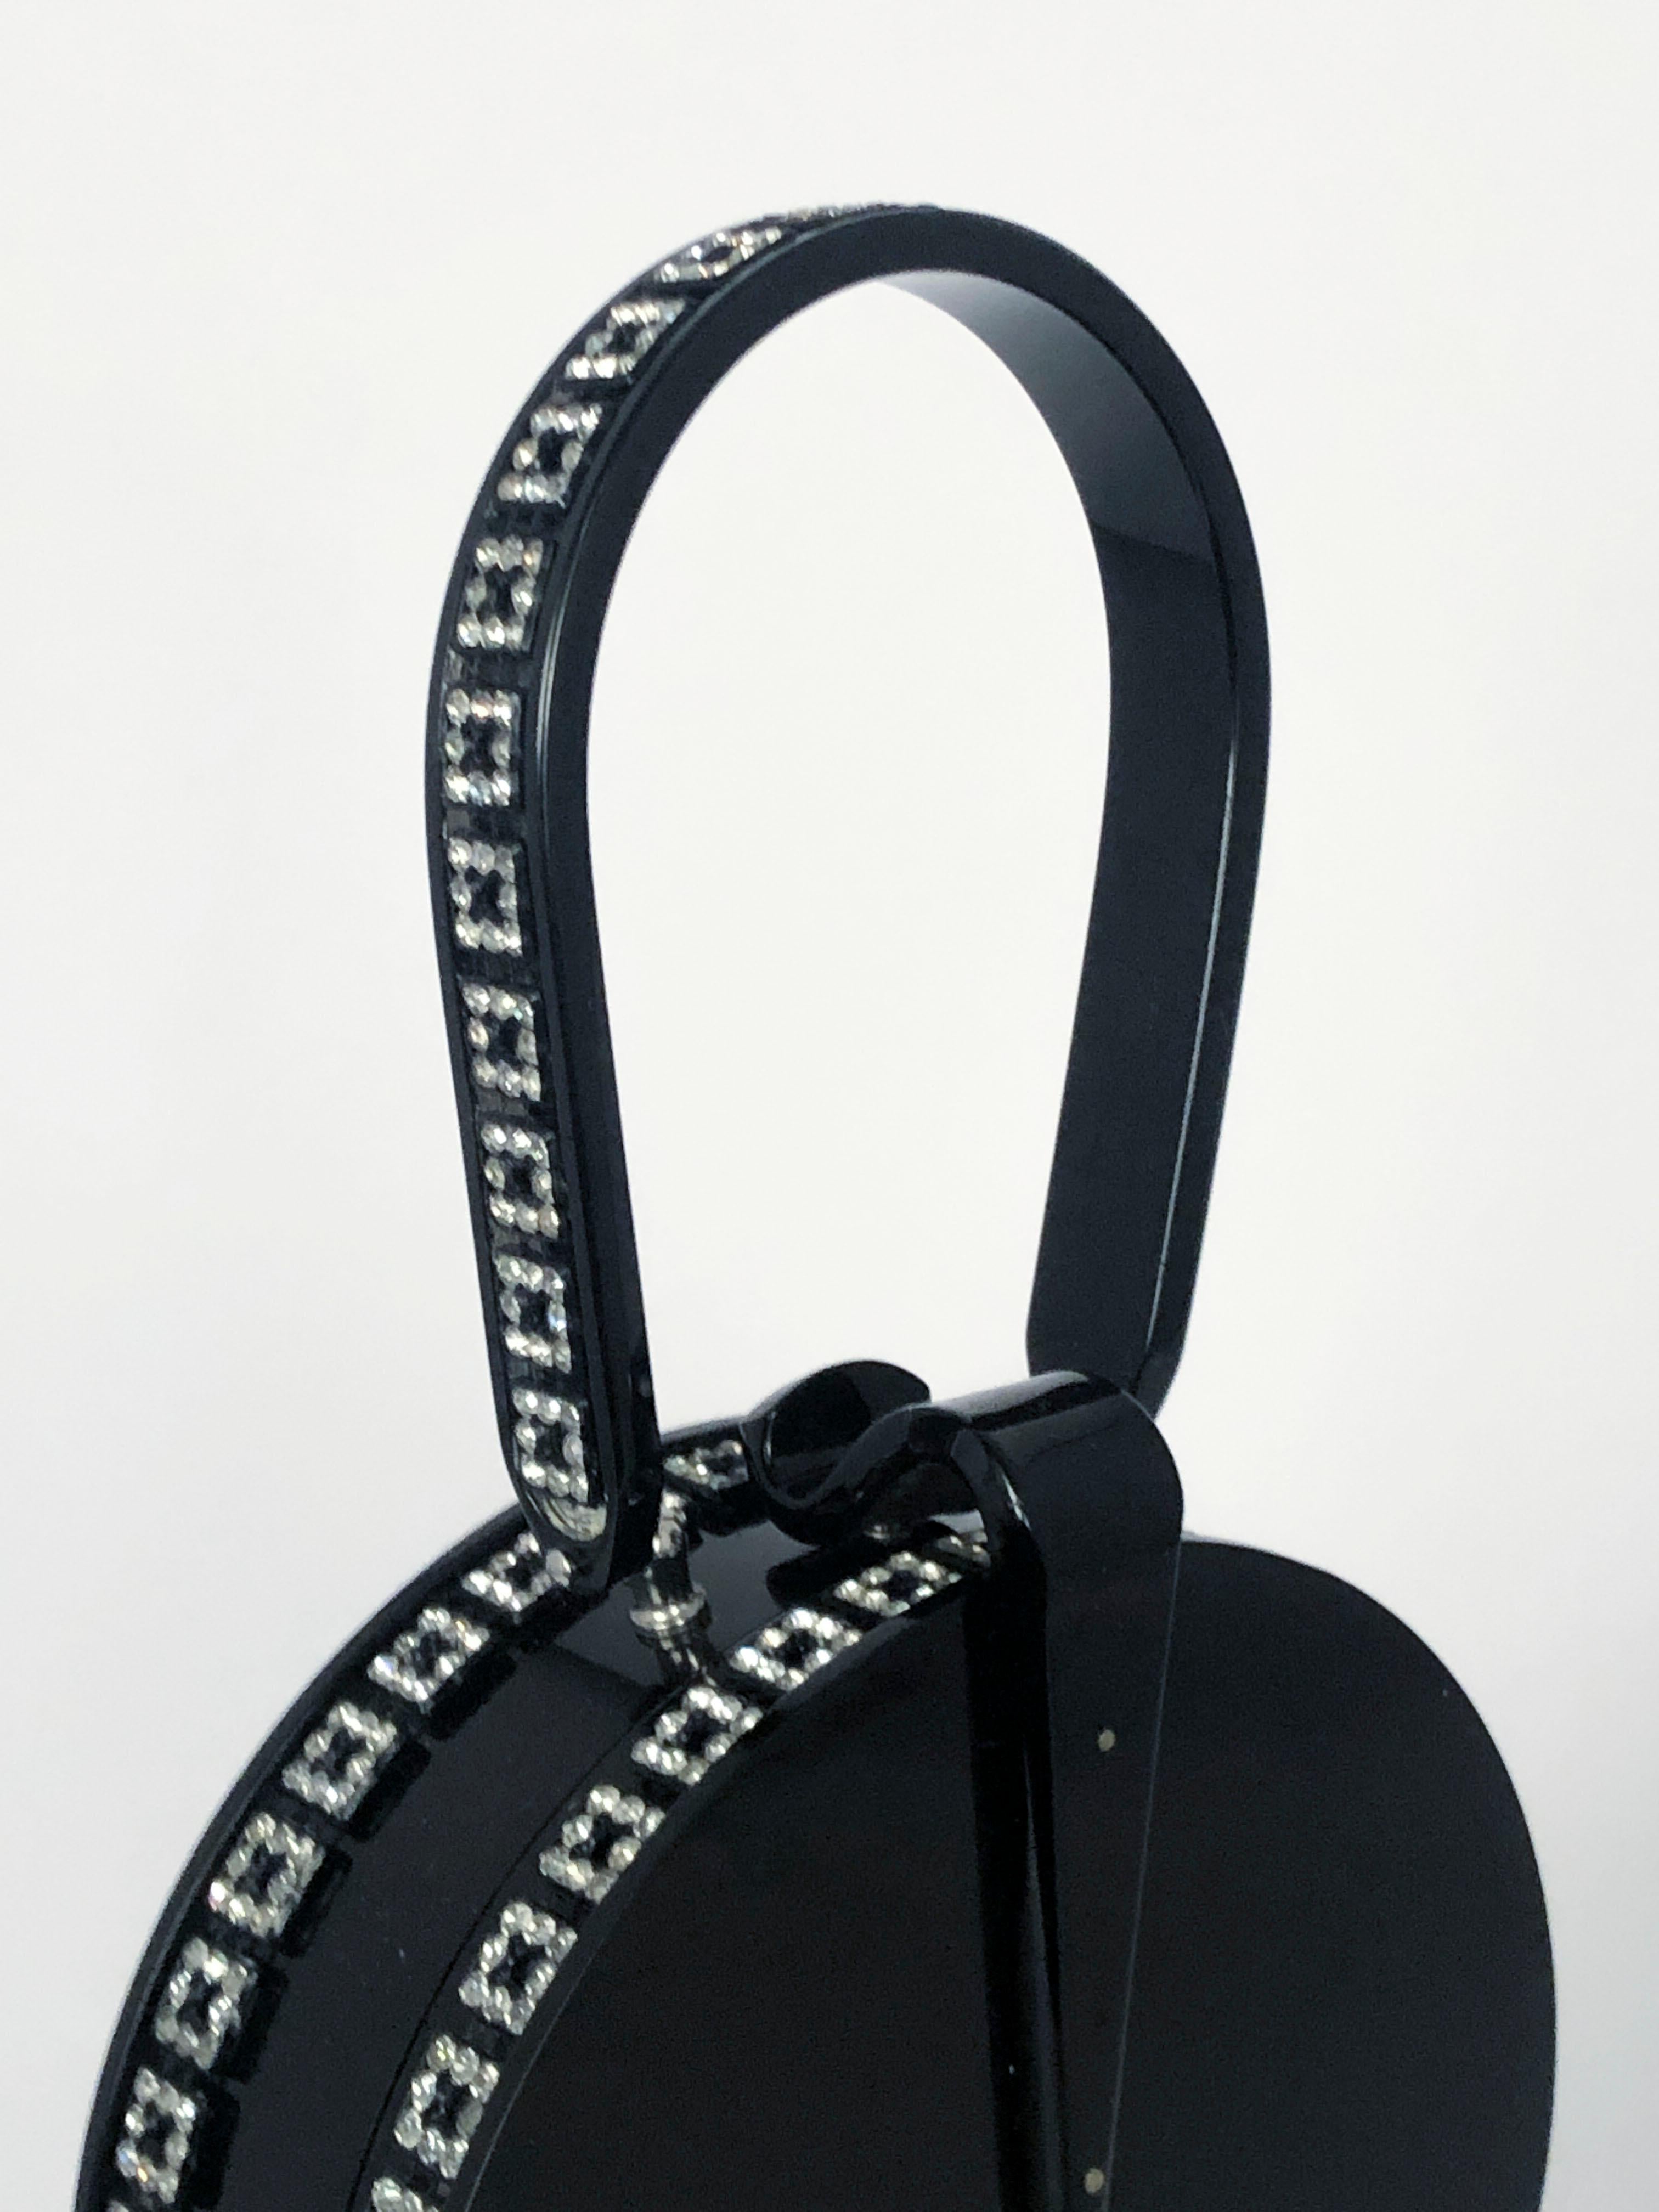 Black Lucite handbag accented with a clear rhinestone border configured in a geometric pattern. The interior is fixed with a large circular mirror attached to the side of the handbag.